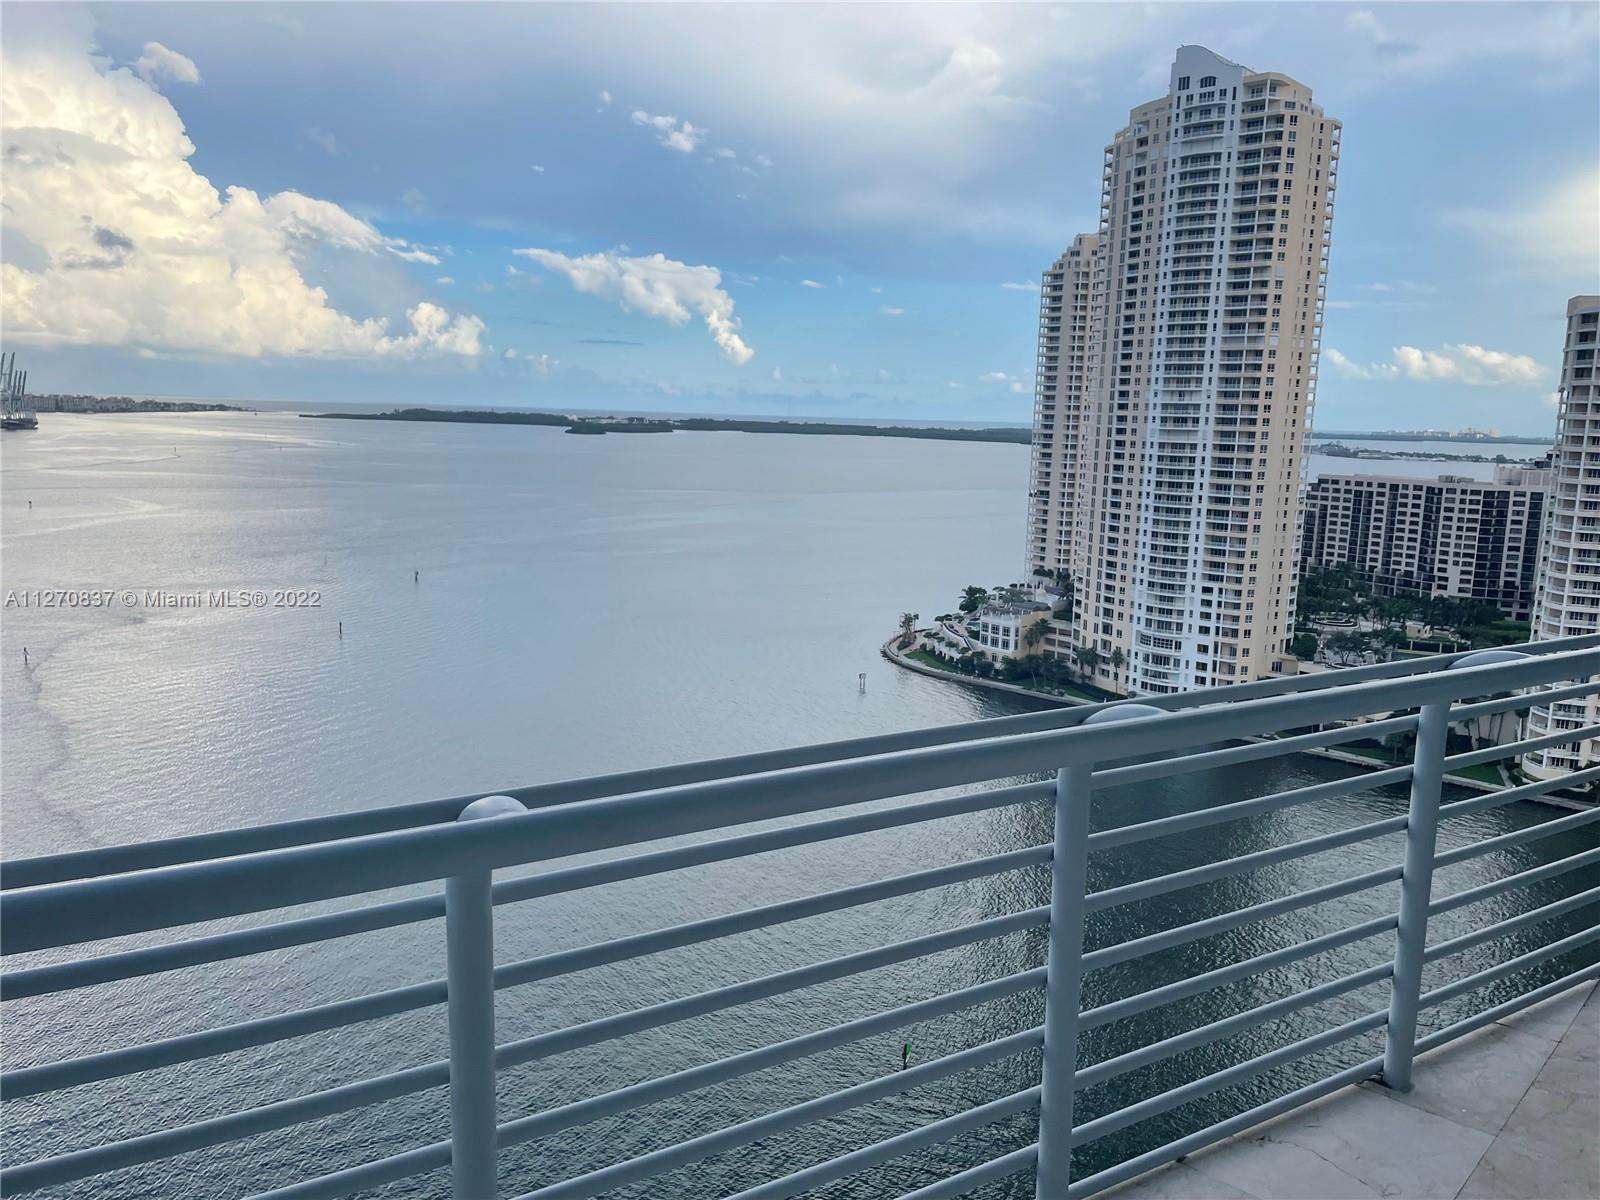 Enjoy Miami life in this spectacular One Miami east home with direct unobstructed water views. The s